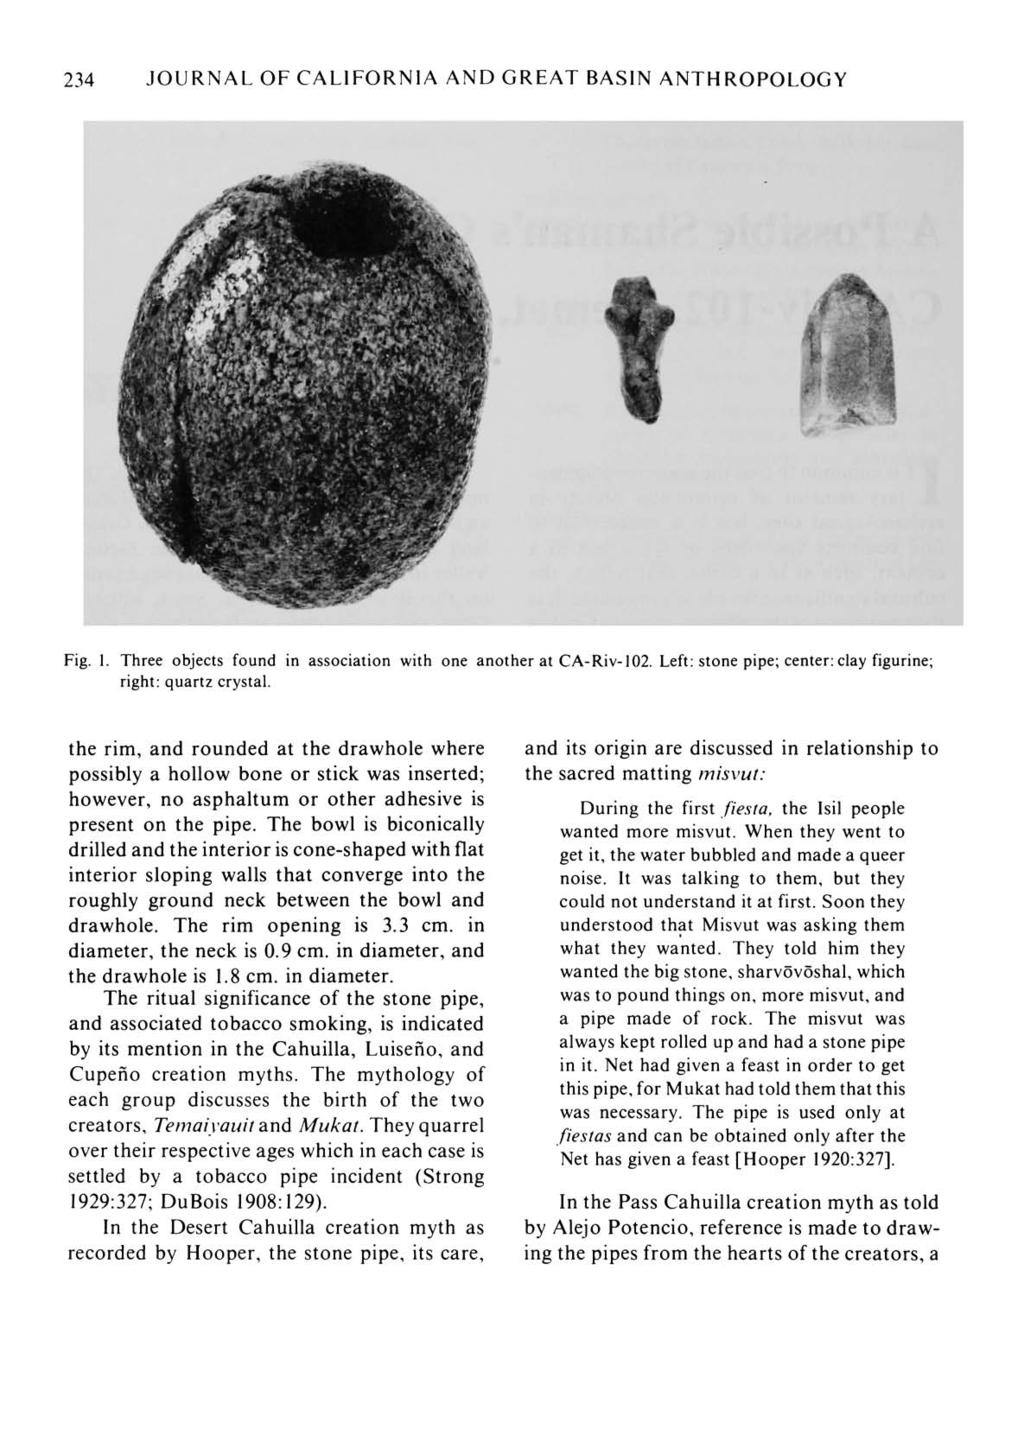 234 JOURNAL OF CALIFORNIA AND GREAT BASIN ANTHROPOLOGY Fig. 1. Three objects found in association with one another at CA-Riv-102. Left: stone pipe; center: clay figurine; right: quartz crystal.